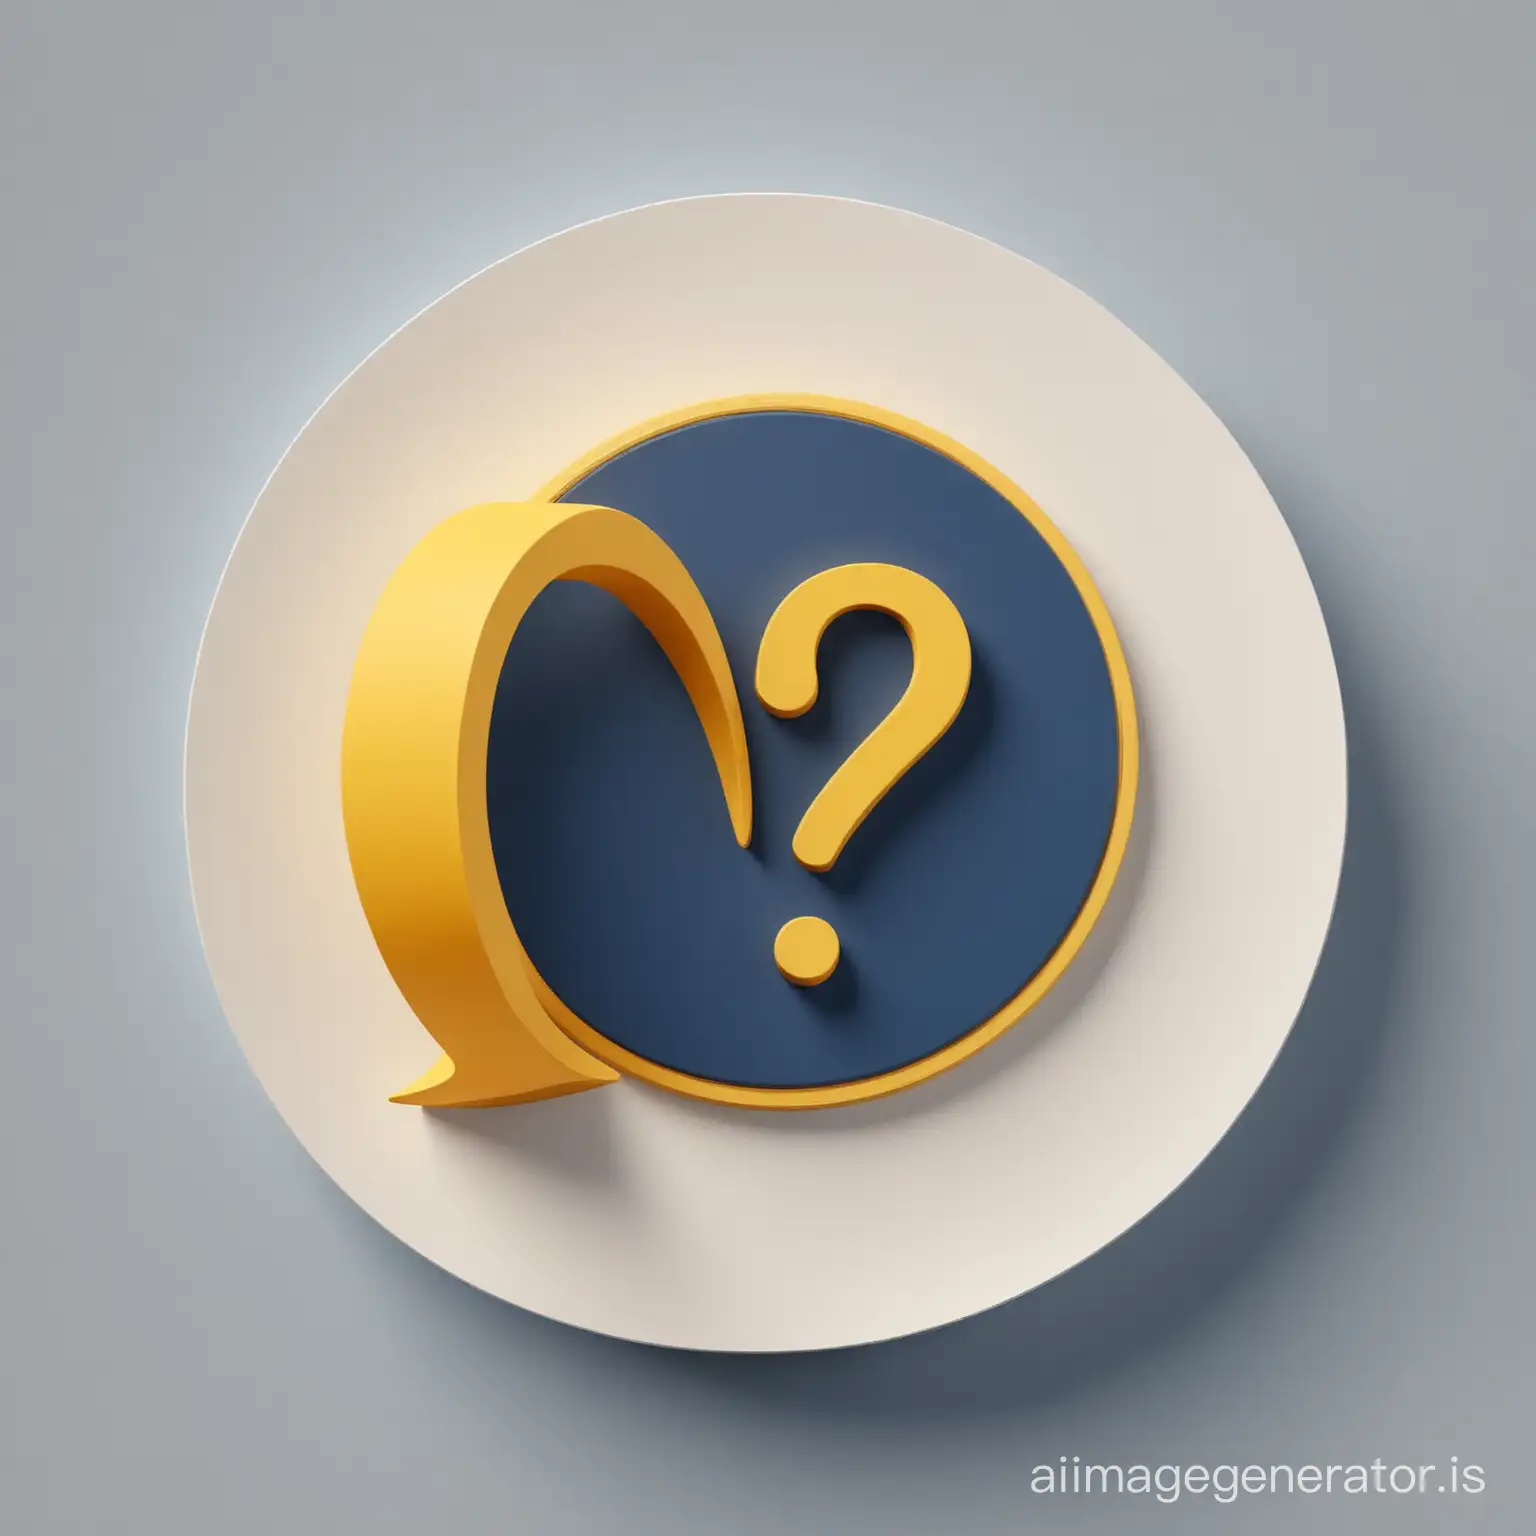 CREATE A 3D IMAGE OF A DARK BLUE AND SHAPED ICON OF A PERSON PROFILE AND A YELLOW COLOR ESCLAMATION POINT WITHIN A WHITE COLOR CIRCLE IN THE CENTER 
WITH BRNANCO BACKGROUND